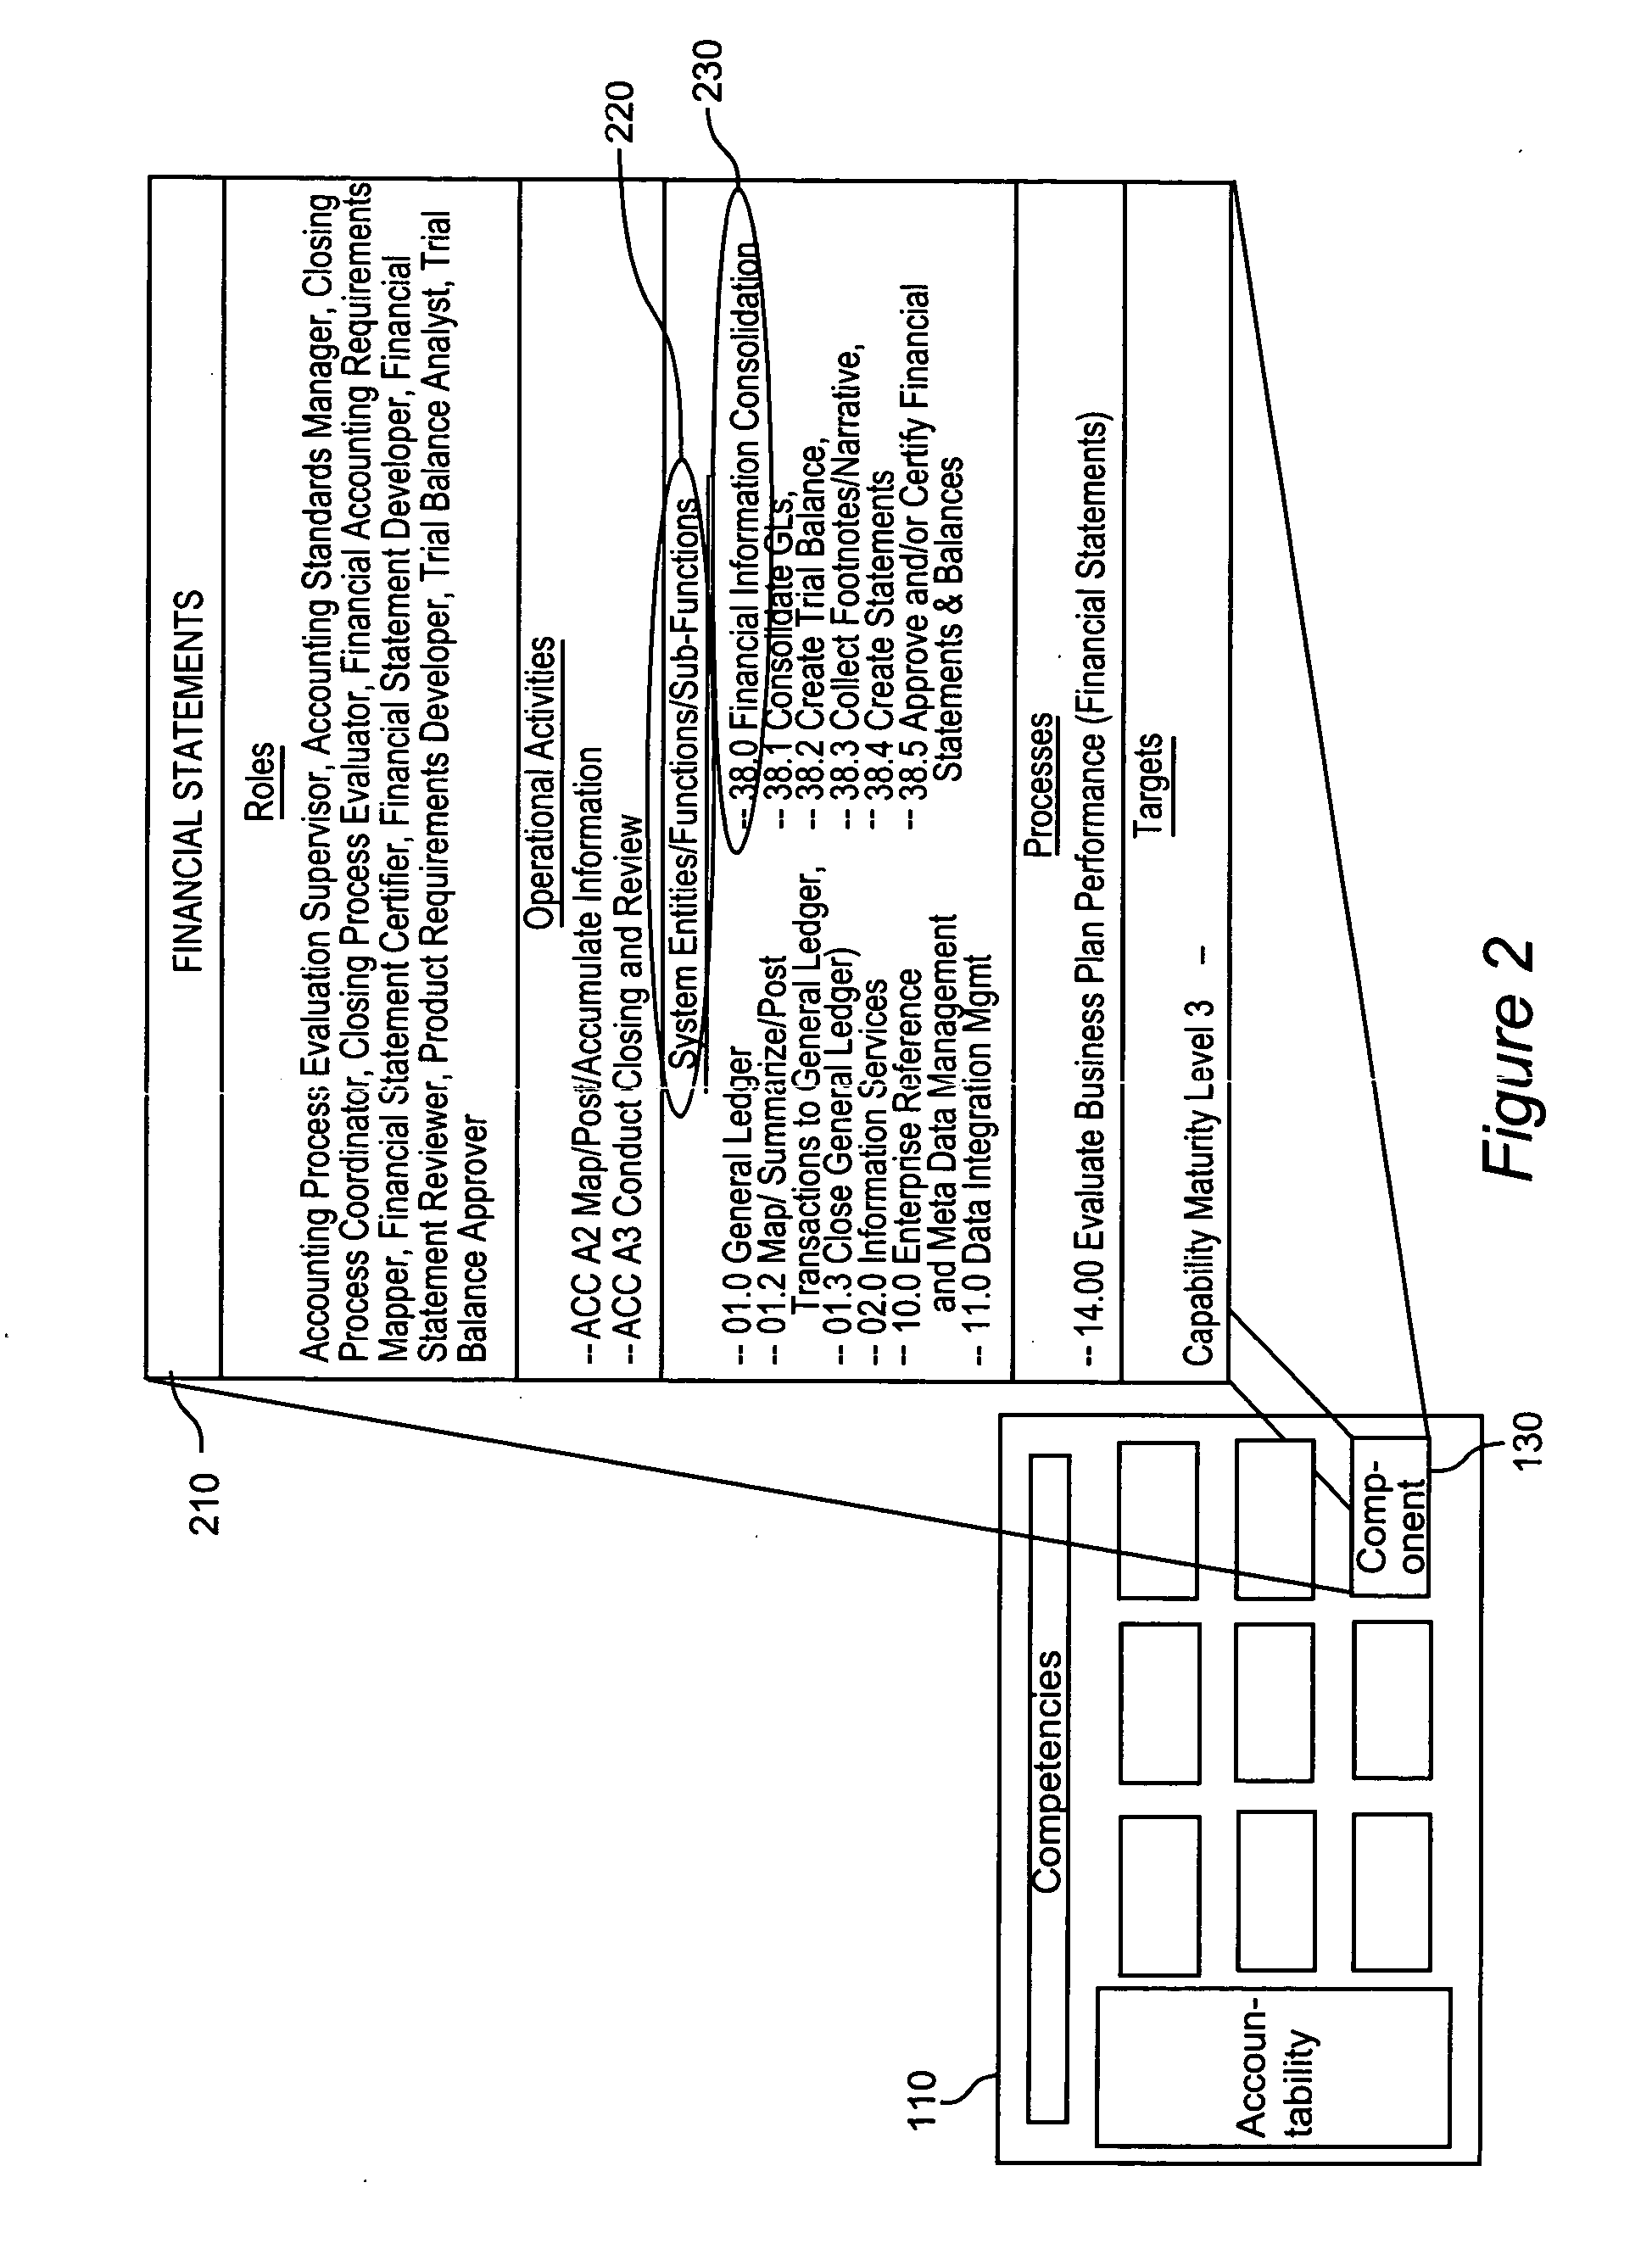 Method and system for constructing, managing and using enterprise architecture in a component busines model